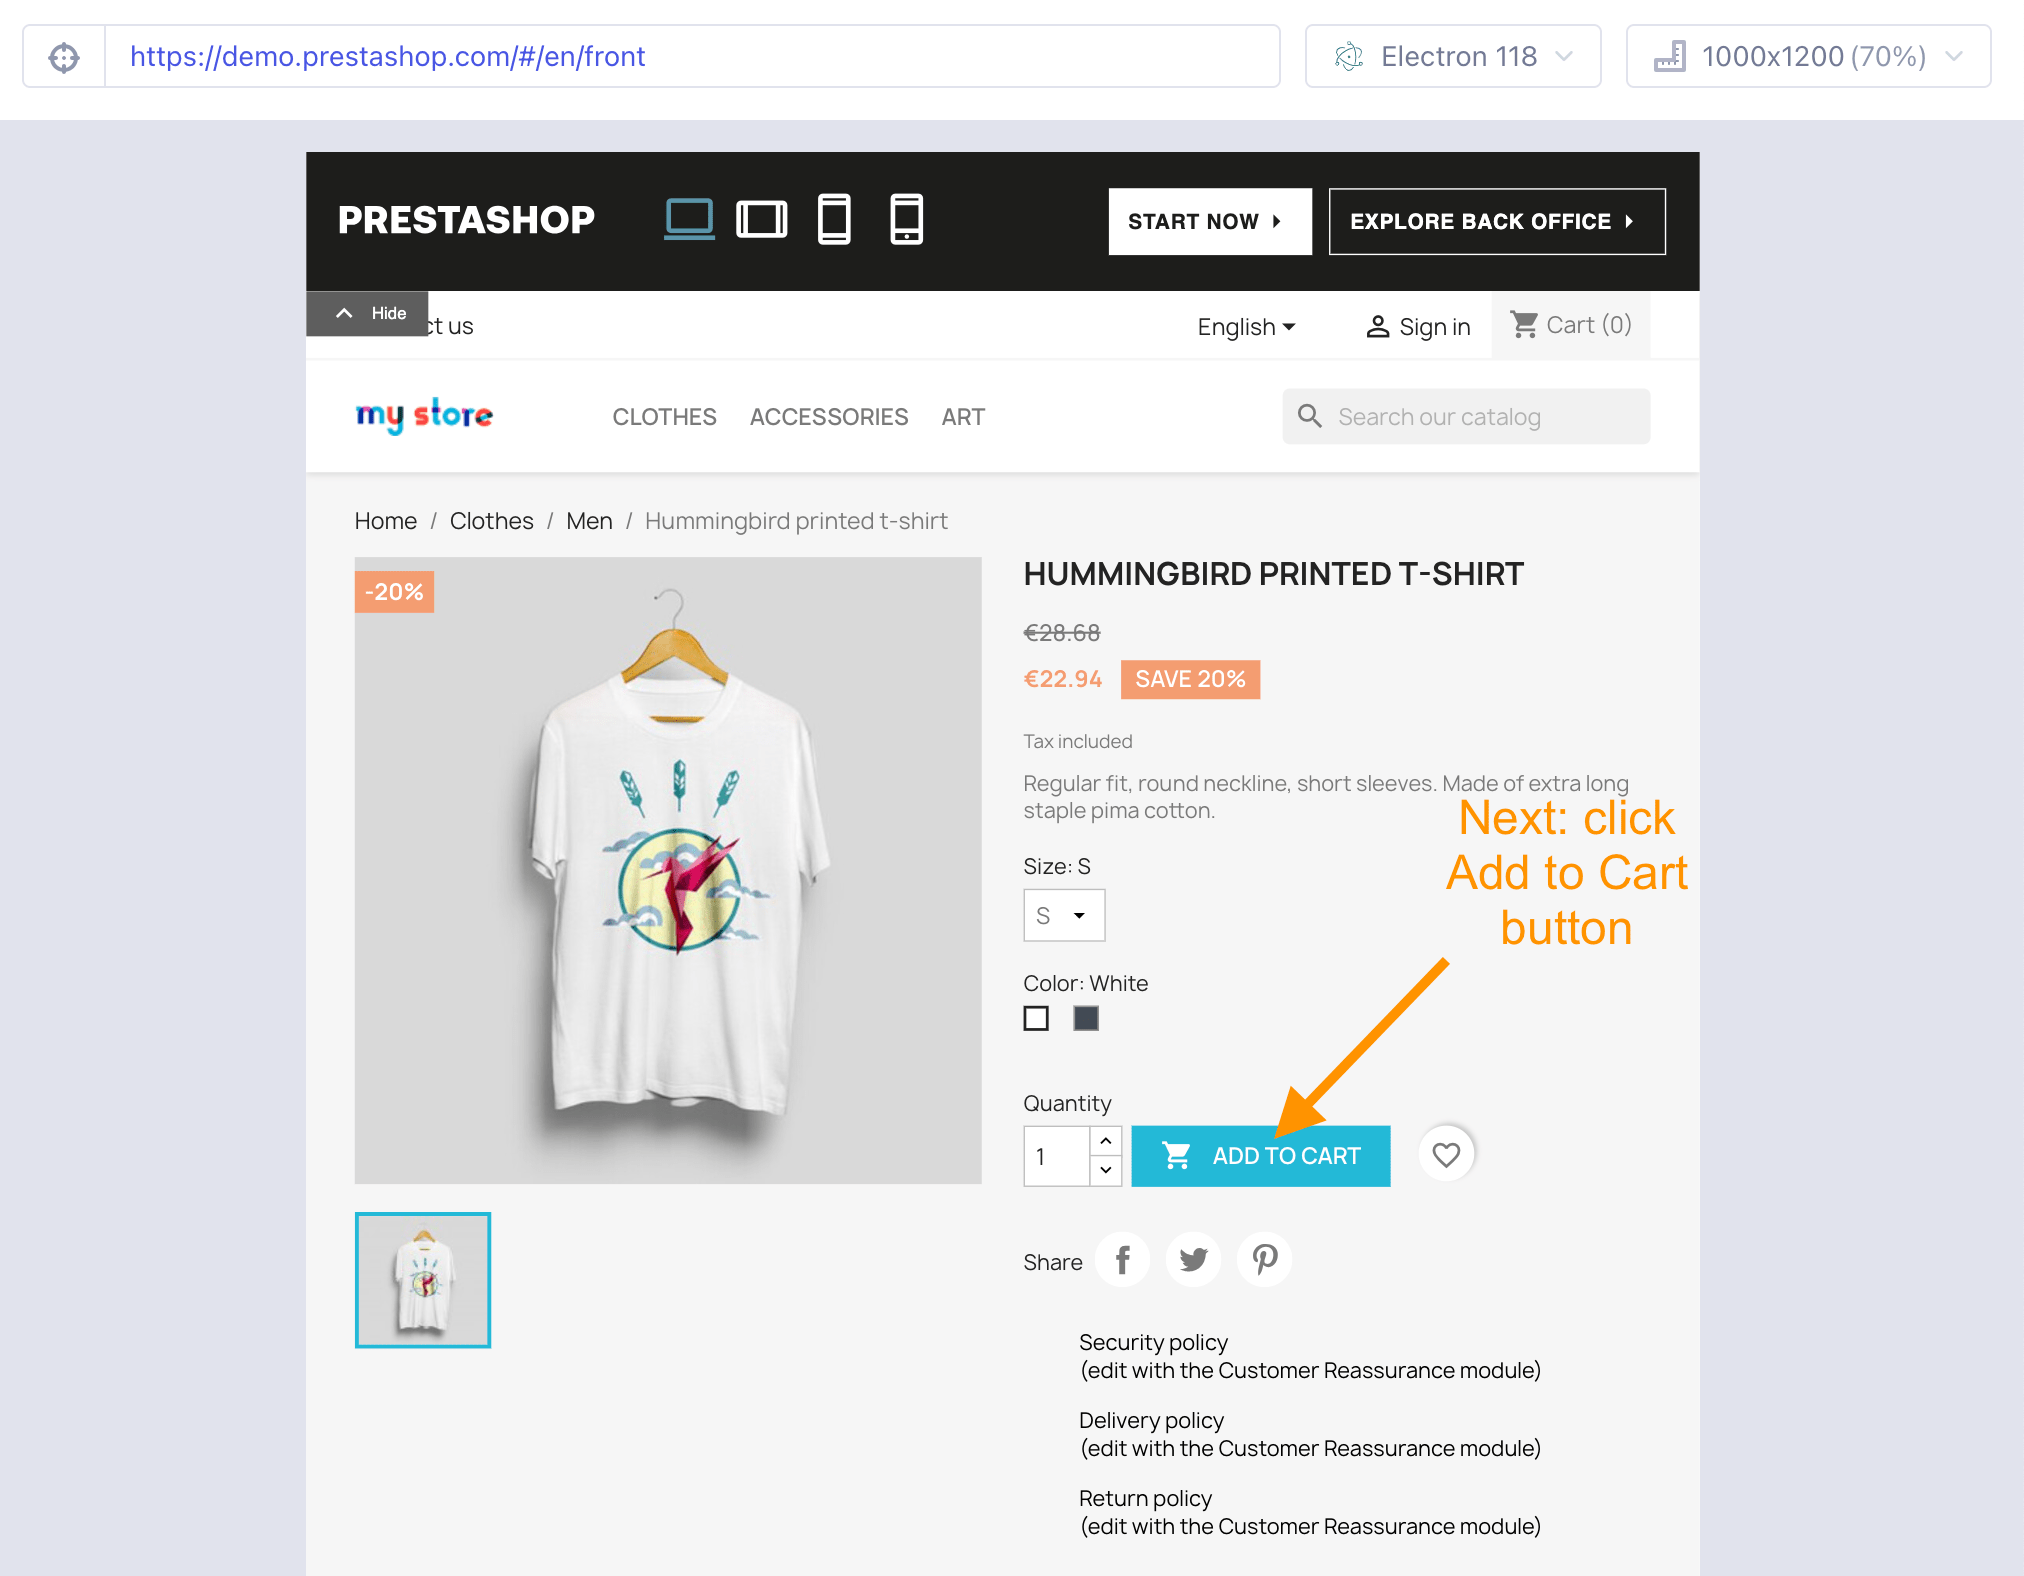 The item view where we want to click on the Add To Cart button